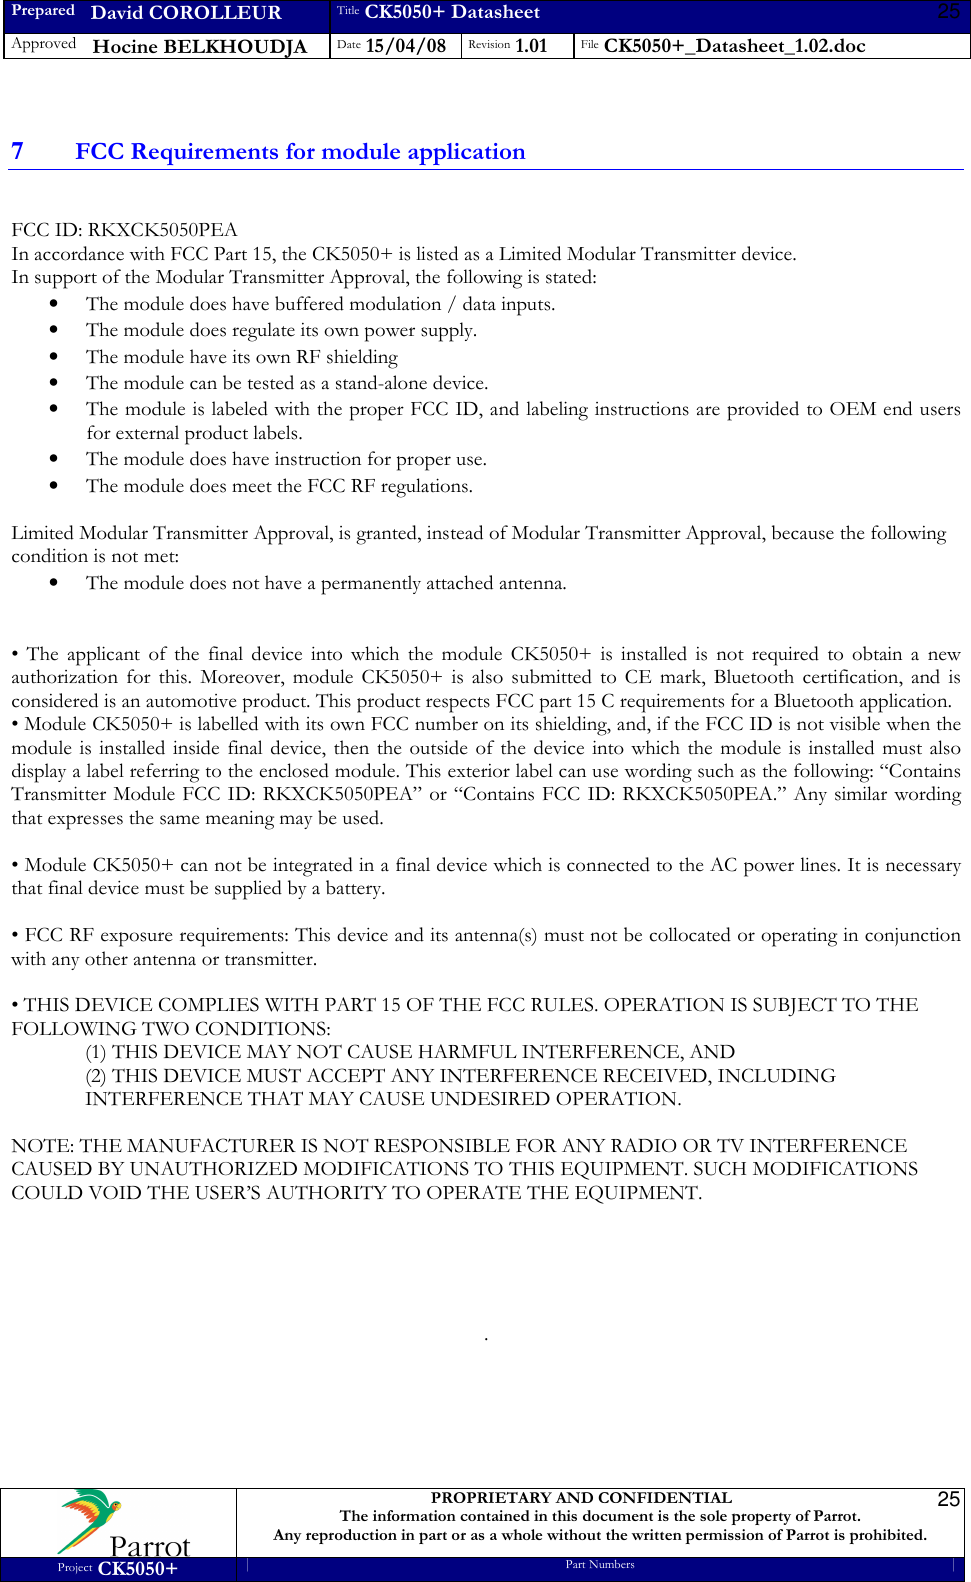 Prepared   David COROLLEUR Title CK5050+ Datasheet Approved   Hocine BELKHOUDJA Date 15/04/08 Revision 1.01 File CK5050+_Datasheet_1.02.doc     PROPRIETARY AND CONFIDENTIAL The information contained in this document is the sole property of Parrot. Any reproduction in part or as a whole without the written permission of Parrot is prohibited. Project CK5050+ Part Numbers   25 25 7 FCC Requirements for module application  FCC ID: RKXCK5050PEA In accordance with FCC Part 15, the CK5050+ is listed as a Limited Modular Transmitter device. In support of the Modular Transmitter Approval, the following is stated: • The module does have buffered modulation / data inputs. • The module does regulate its own power supply. • The module have its own RF shielding • The module can be tested as a stand-alone device. • The module is labeled with the proper FCC ID, and labeling instructions are provided to OEM end users for external product labels. • The module does have instruction for proper use. • The module does meet the FCC RF regulations.  Limited Modular Transmitter Approval, is granted, instead of Modular Transmitter Approval, because the following condition is not met: • The module does not have a permanently attached antenna.   •  The  applicant  of  the  final  device  into  which  the  module  CK5050+  is  installed  is  not  required  to  obtain  a  new authorization  for  this.  Moreover,  module  CK5050+  is  also  submitted  to  CE  mark,  Bluetooth  certification,  and  is considered is an automotive product. This product respects FCC part 15 C requirements for a Bluetooth application. • Module CK5050+ is labelled with its own FCC number on its shielding, and, if the FCC ID is not visible when the module  is installed inside  final  device, then the  outside of the  device  into which the module  is installed  must  also display a label referring to the enclosed module. This exterior label can use wording such as the following: “Contains Transmitter Module FCC ID:  RKXCK5050PEA”  or “Contains FCC ID: RKXCK5050PEA.” Any similar wording that expresses the same meaning may be used.  • Module CK5050+ can not be integrated in a final device which is connected to the AC power lines. It is necessary that final device must be supplied by a battery.  • FCC RF exposure requirements: This device and its antenna(s) must not be collocated or operating in conjunction with any other antenna or transmitter.  • THIS DEVICE COMPLIES WITH PART 15 OF THE FCC RULES. OPERATION IS SUBJECT TO THE FOLLOWING TWO CONDITIONS: (1) THIS DEVICE MAY NOT CAUSE HARMFUL INTERFERENCE, AND (2) THIS DEVICE MUST ACCEPT ANY INTERFERENCE RECEIVED, INCLUDING INTERFERENCE THAT MAY CAUSE UNDESIRED OPERATION.  NOTE: THE MANUFACTURER IS NOT RESPONSIBLE FOR ANY RADIO OR TV INTERFERENCE CAUSED BY UNAUTHORIZED MODIFICATIONS TO THIS EQUIPMENT. SUCH MODIFICATIONS COULD VOID THE USER’S AUTHORITY TO OPERATE THE EQUIPMENT.      .